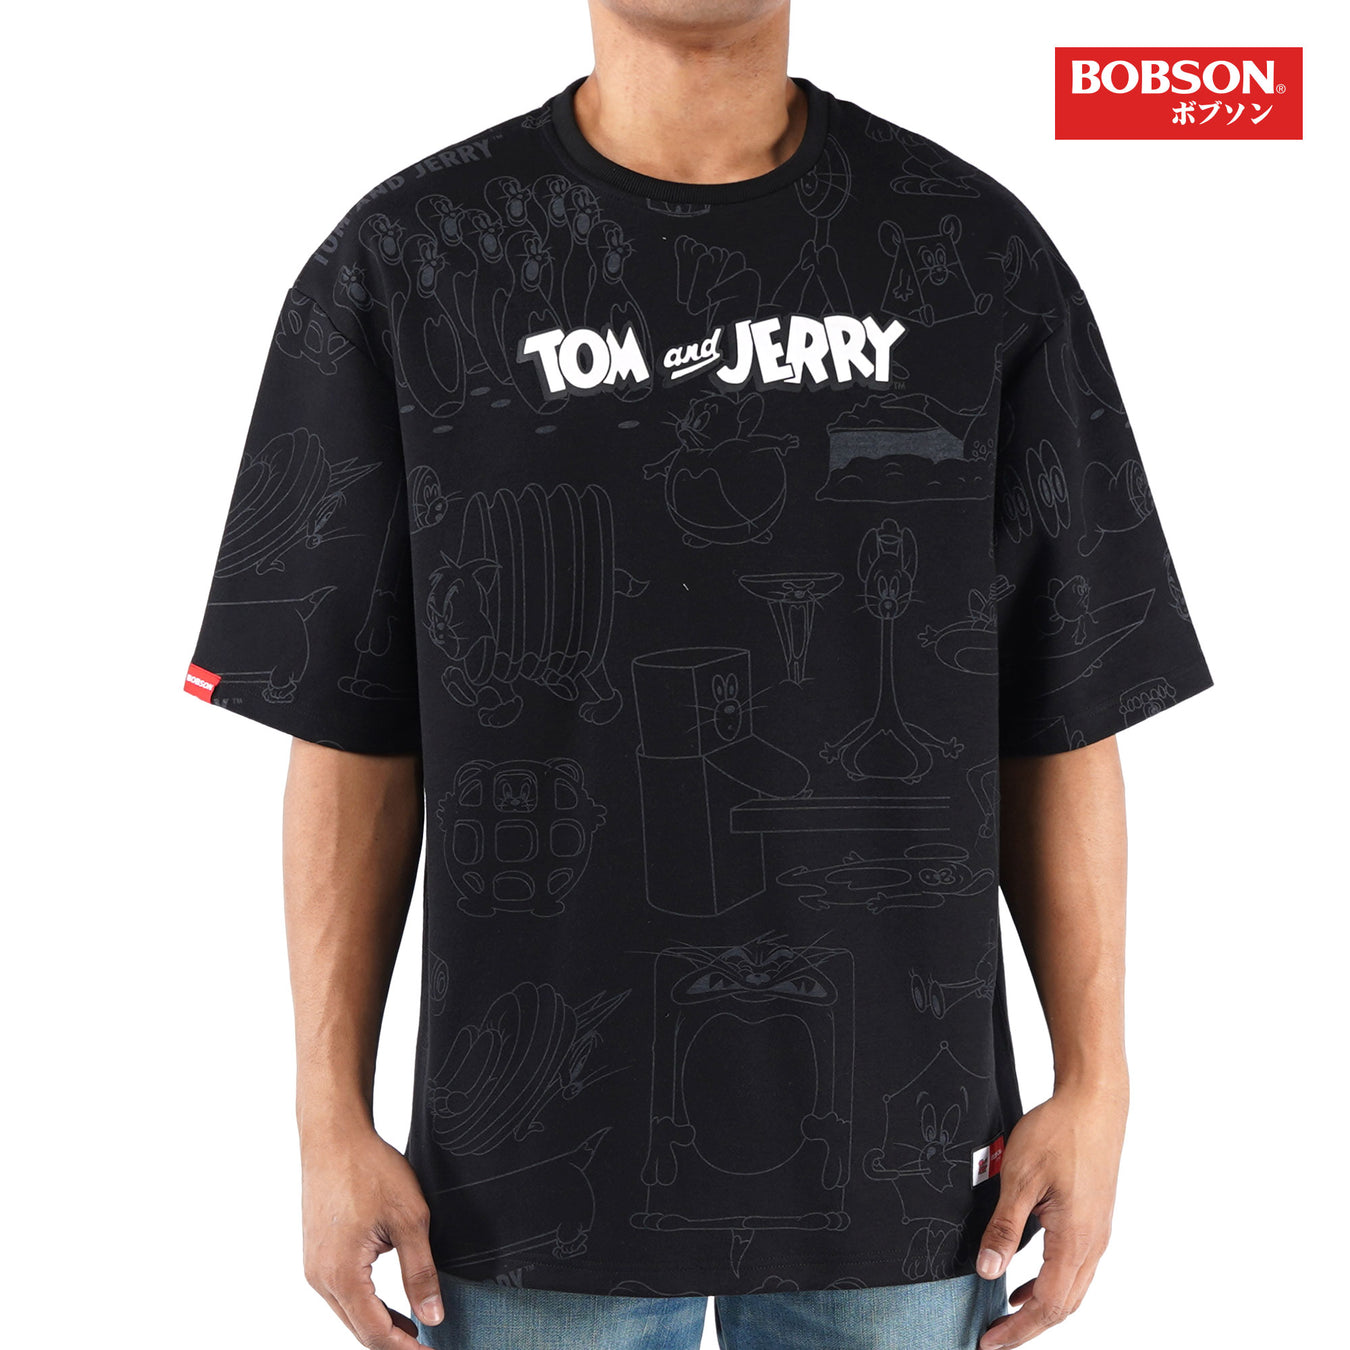 Tom and Jerry X Bobson Collection